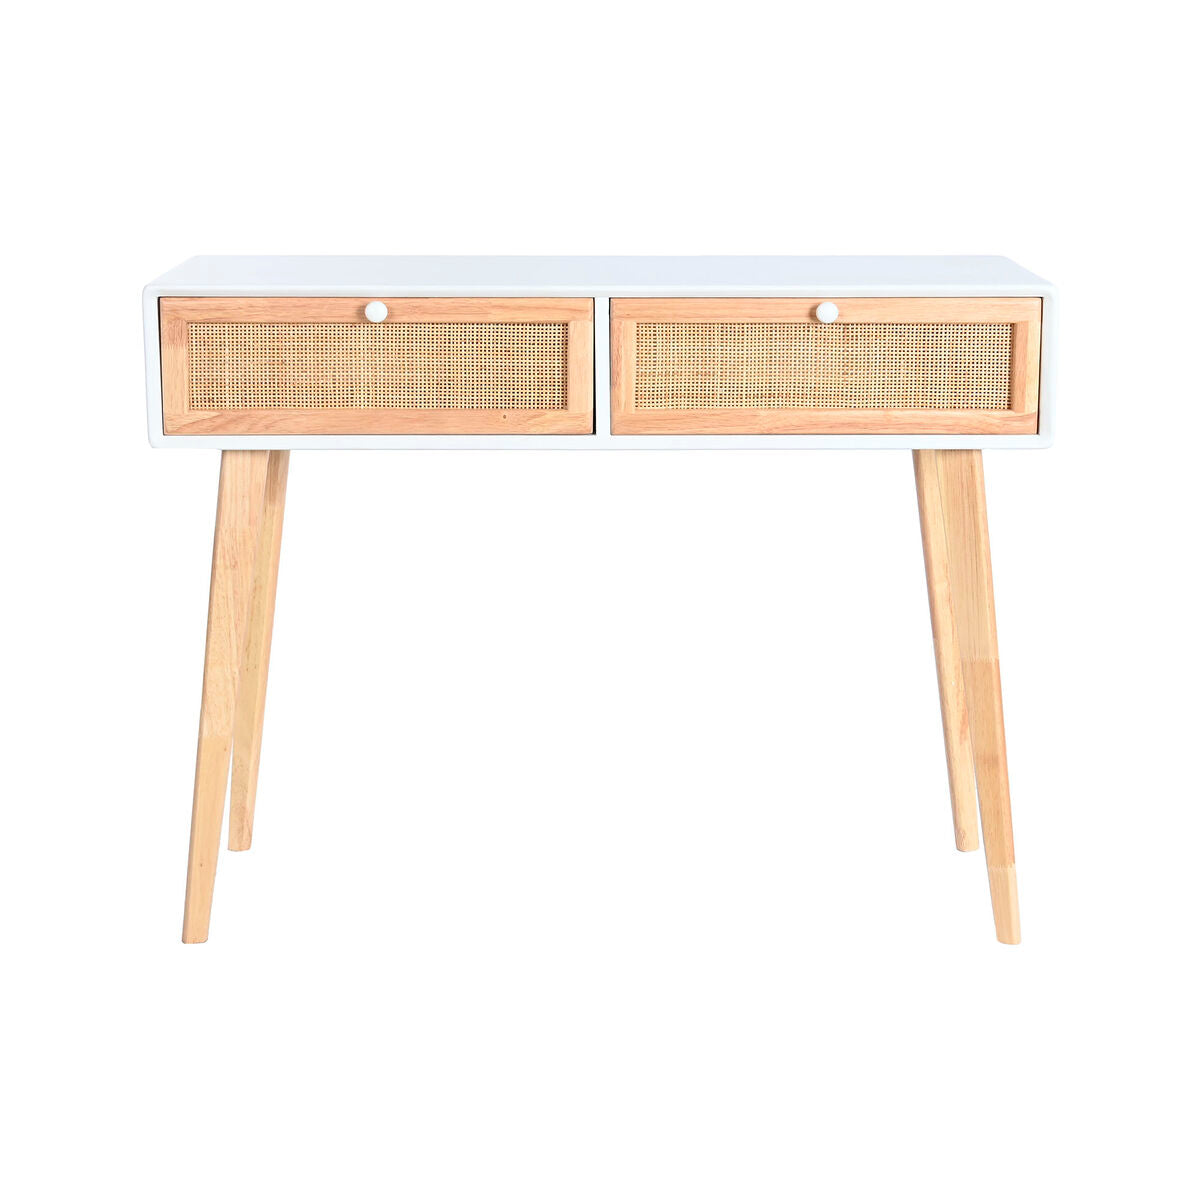 Console DKD Home Decor White Paolownia wood 100 x 30 x 78 cm